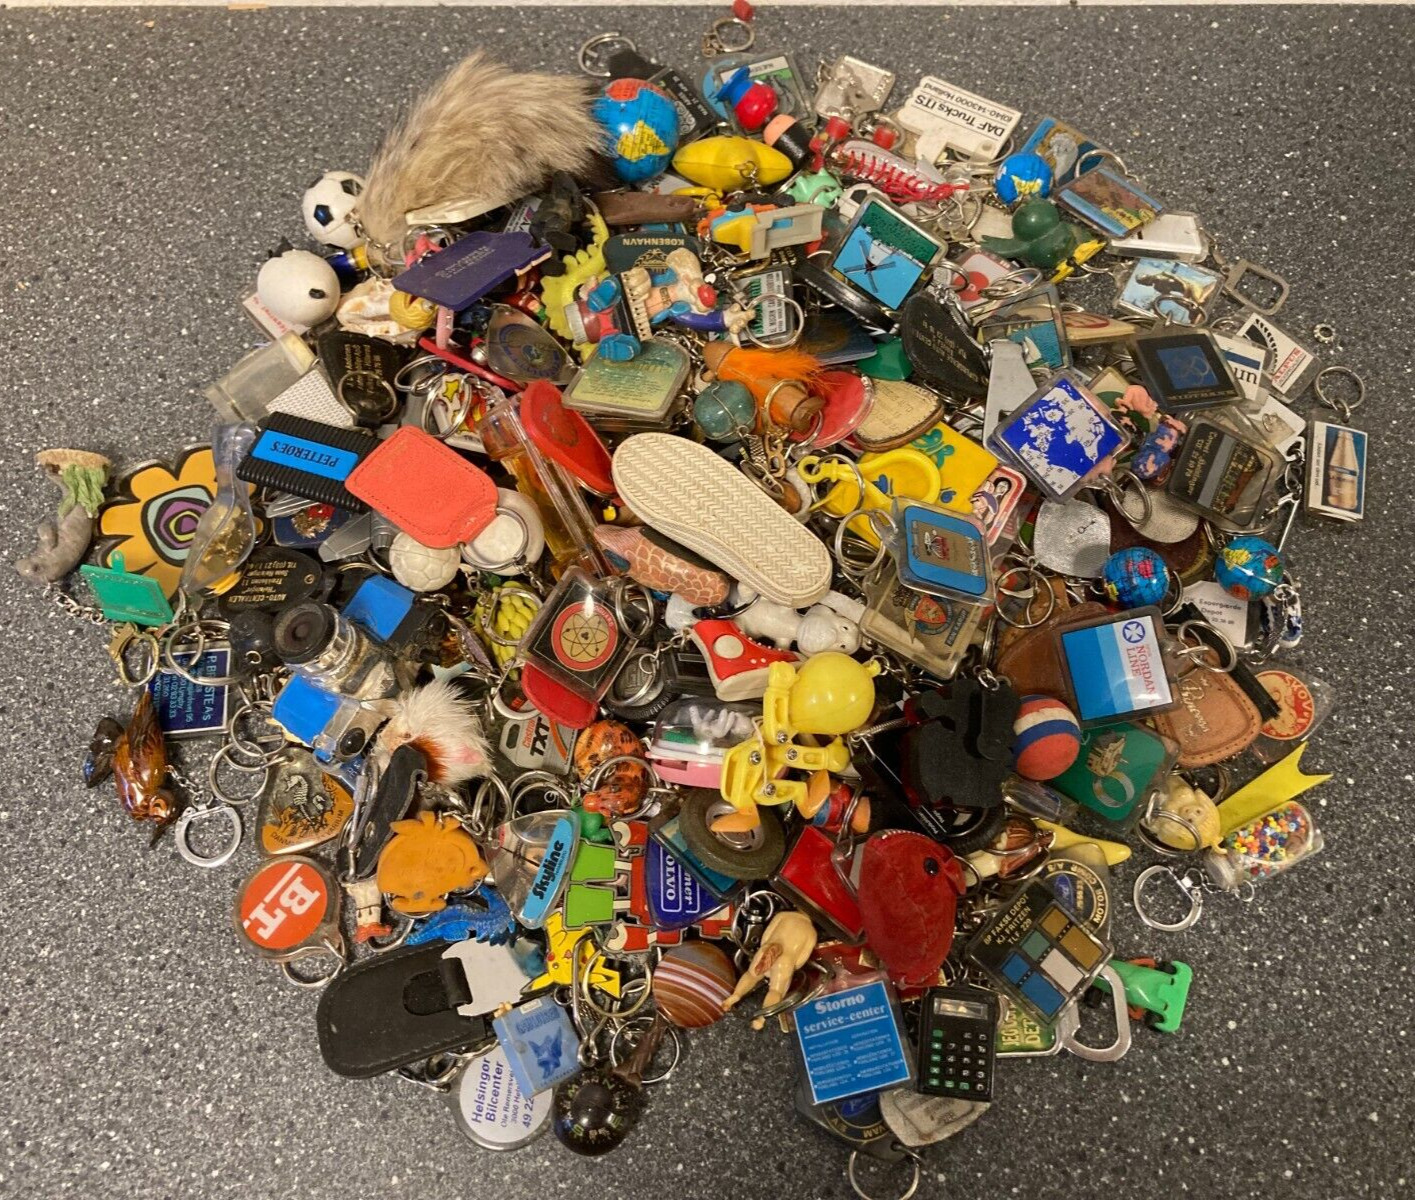 Vintage Danish Key Ring Collection - 300+ Assorted Advertising Keychains - 4 kg